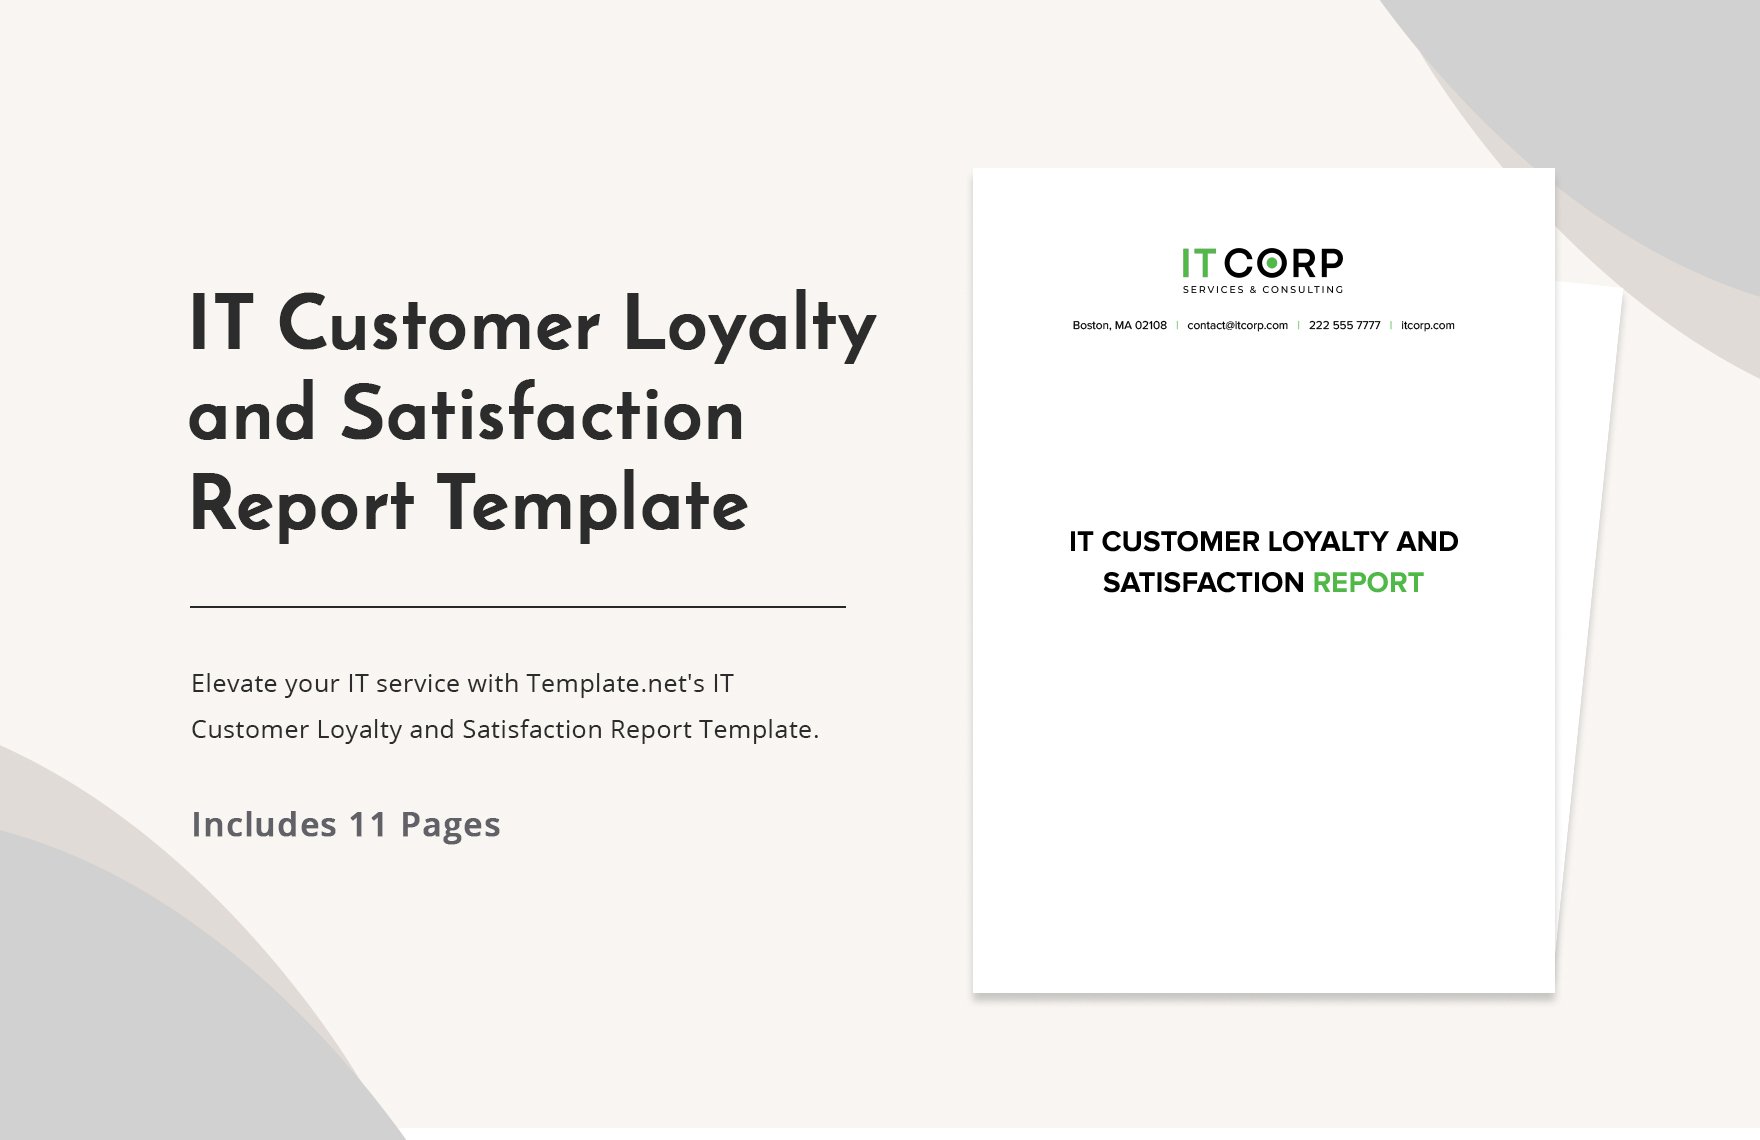 IT Customer Loyalty and Satisfaction Report Template in Word, Google Docs, PDF